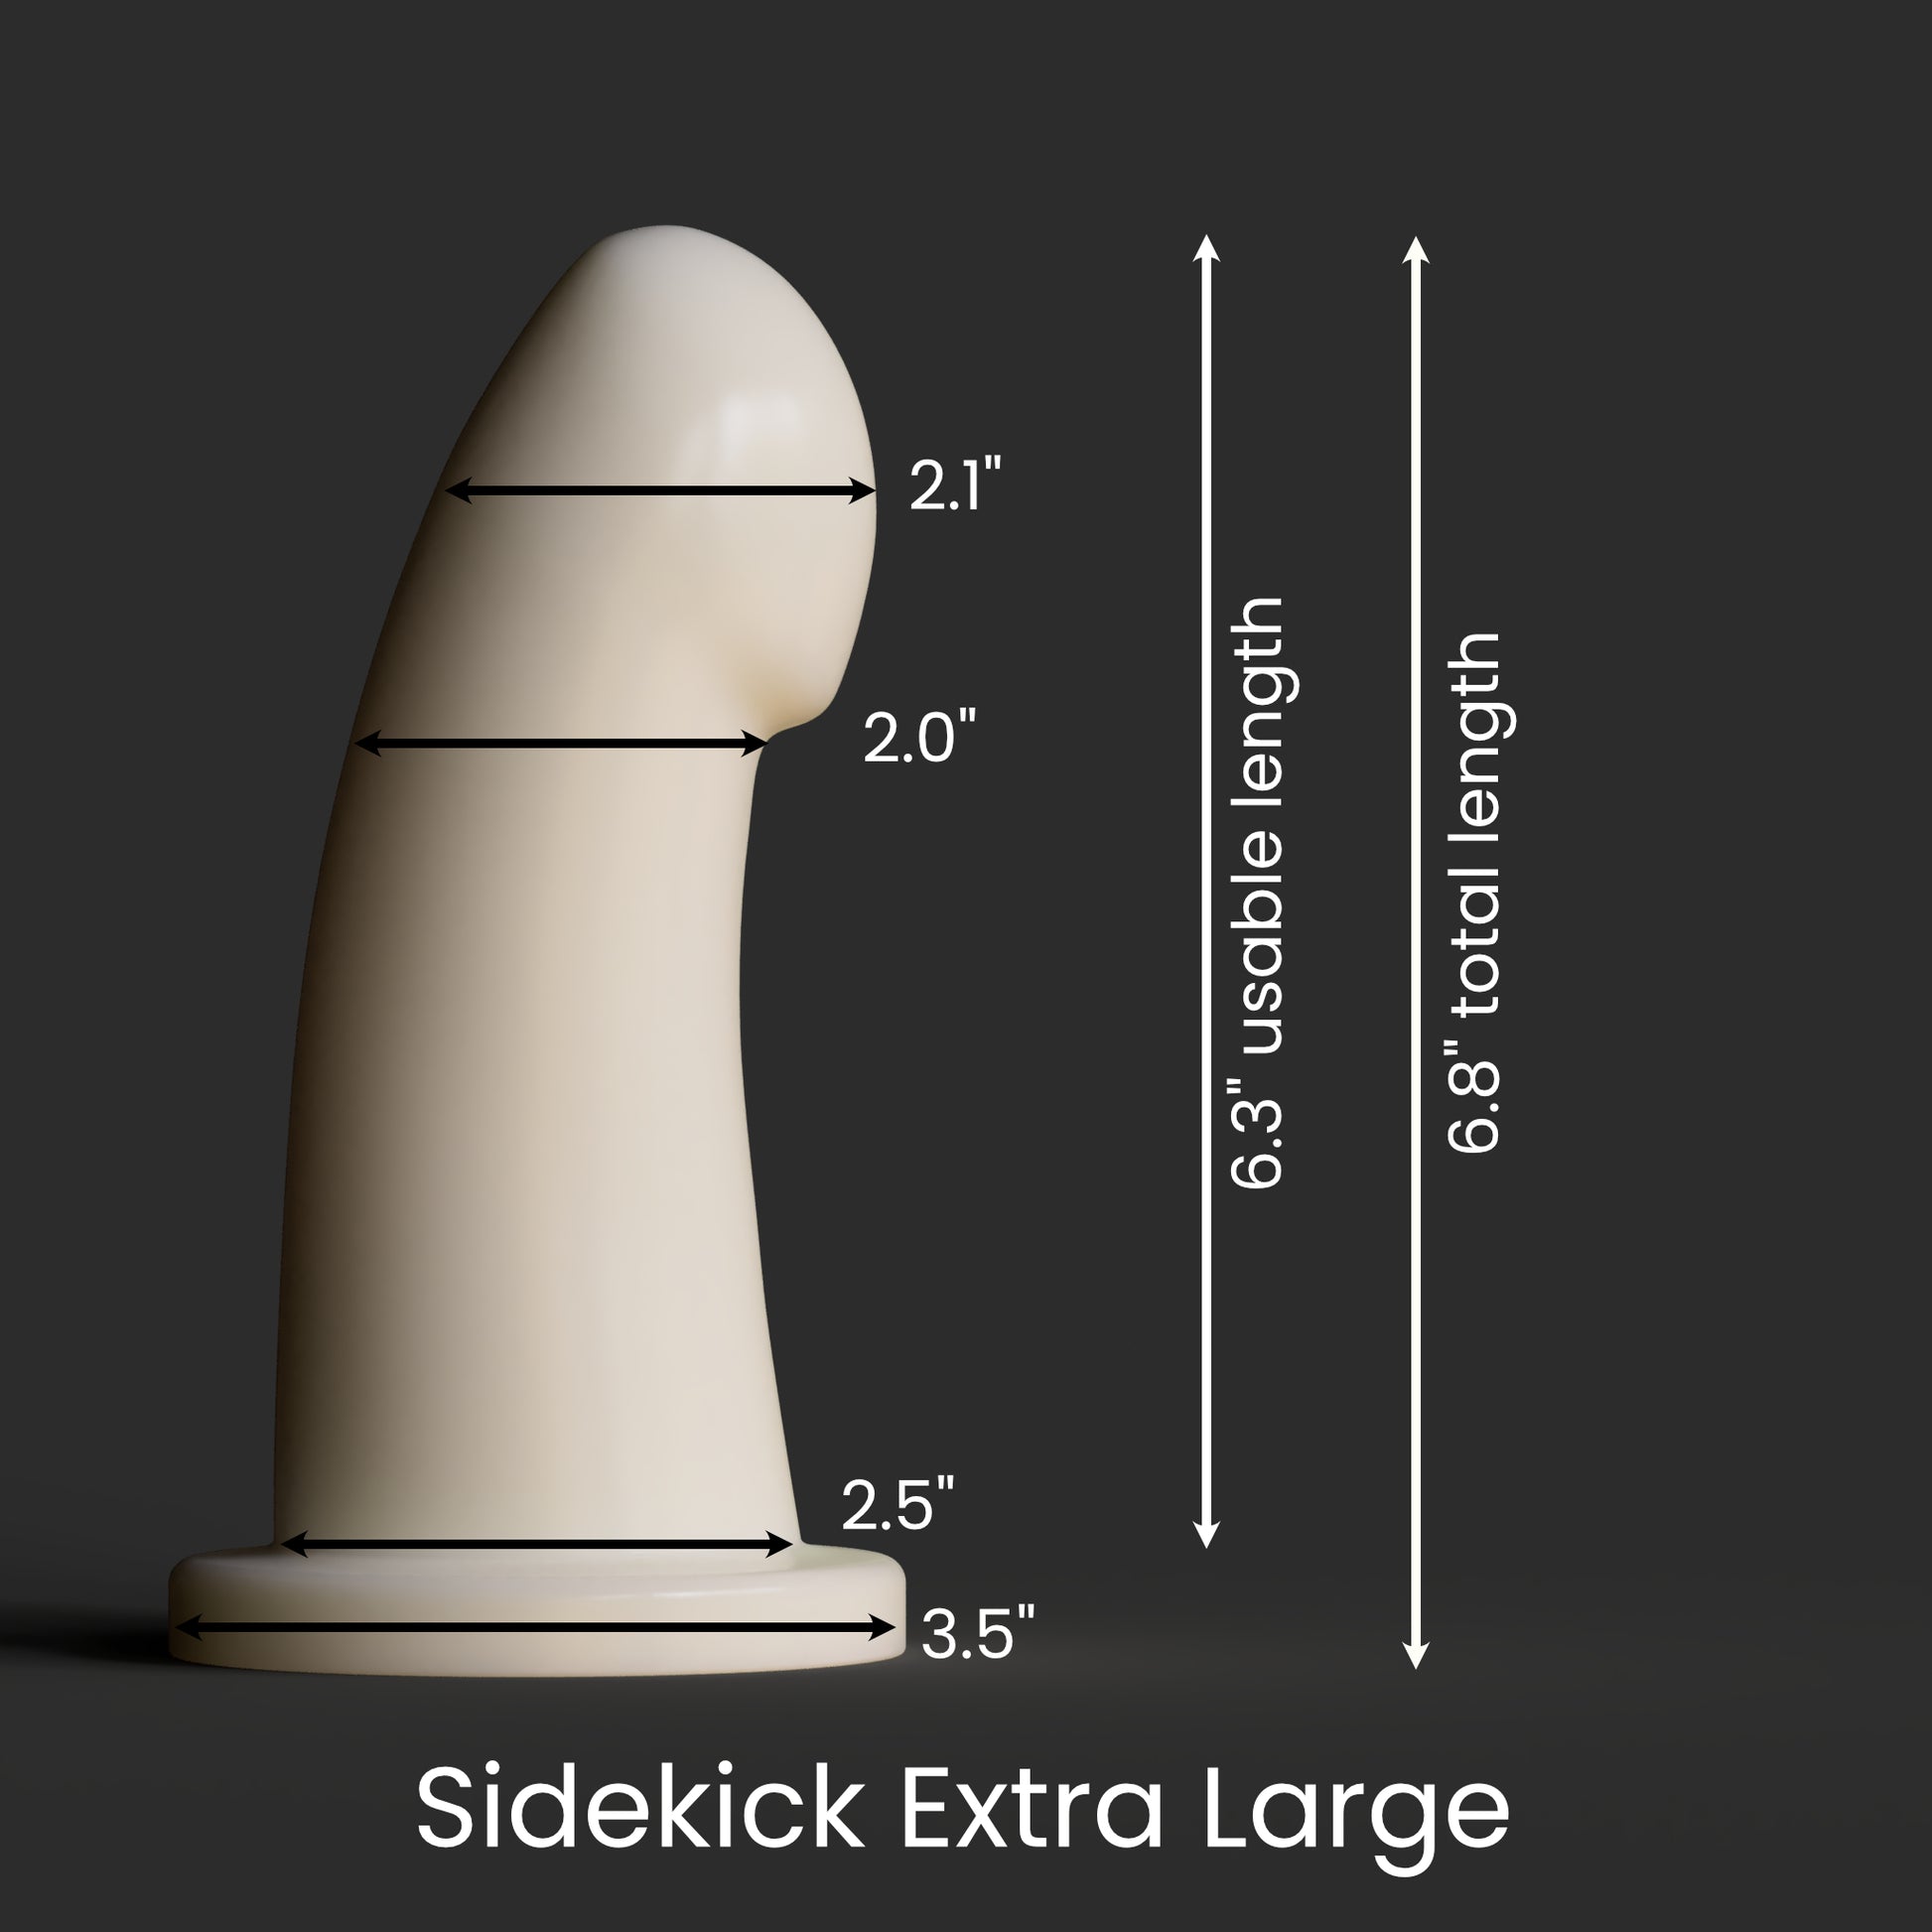 Diagram showing the dimensions of the Sidekick as described in the product description.